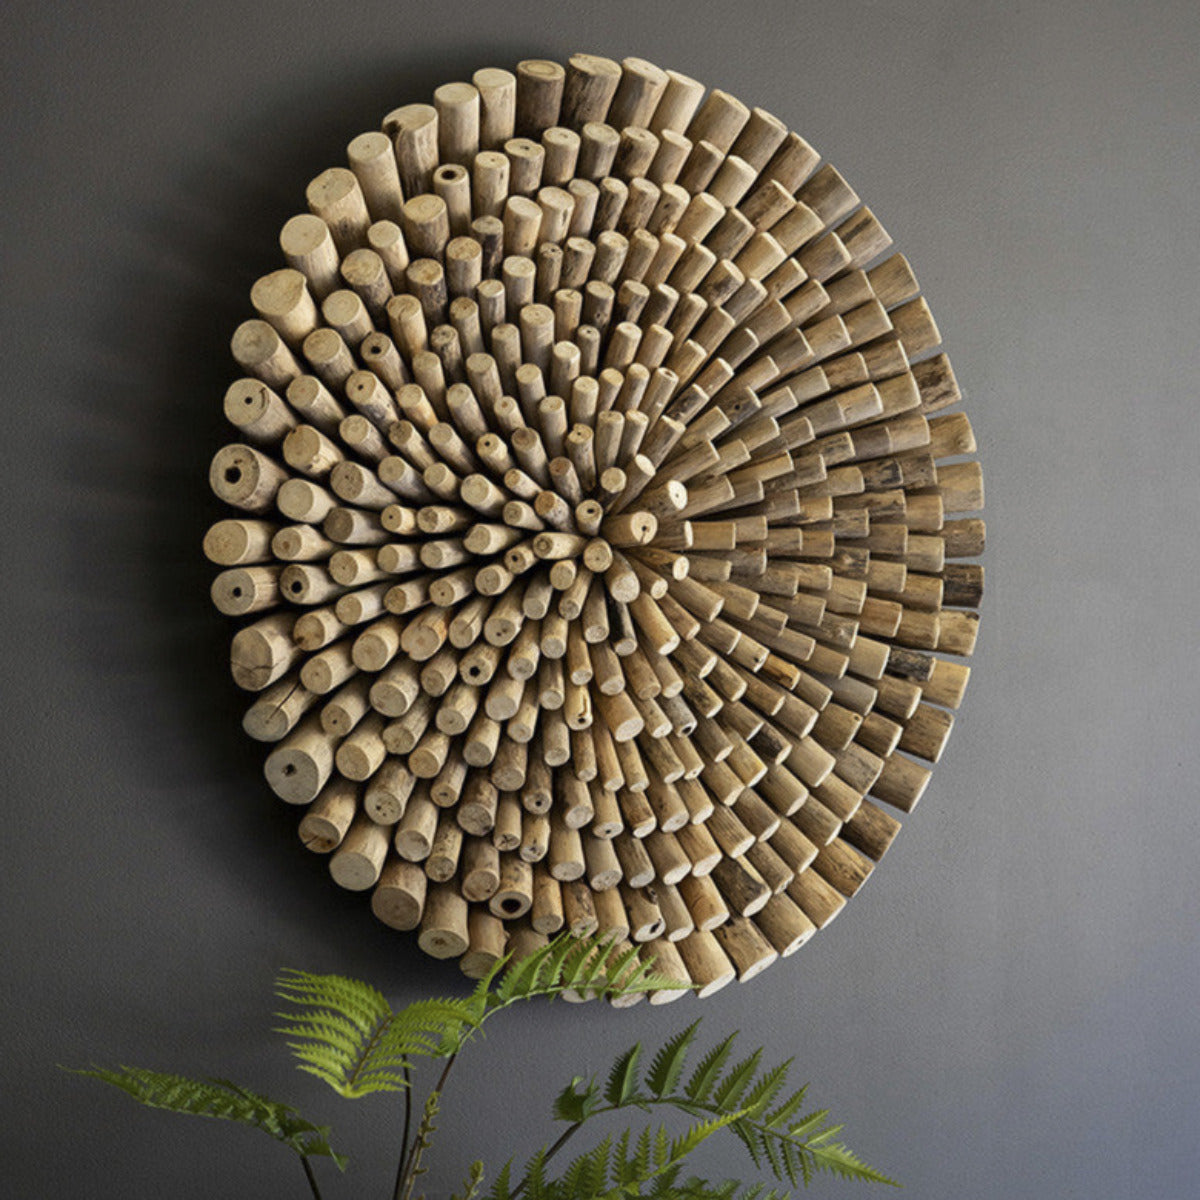 User Dridtwood Circle Wall Art - Use this round driftwood wall art for coastal cabins, beach bungalows, or abstract art spaces. Made in Indonesia, this kaleidoscopic piece is perfect for that empty beach house wall. Hang it in a place where you miss the ocean.  - 30"d 